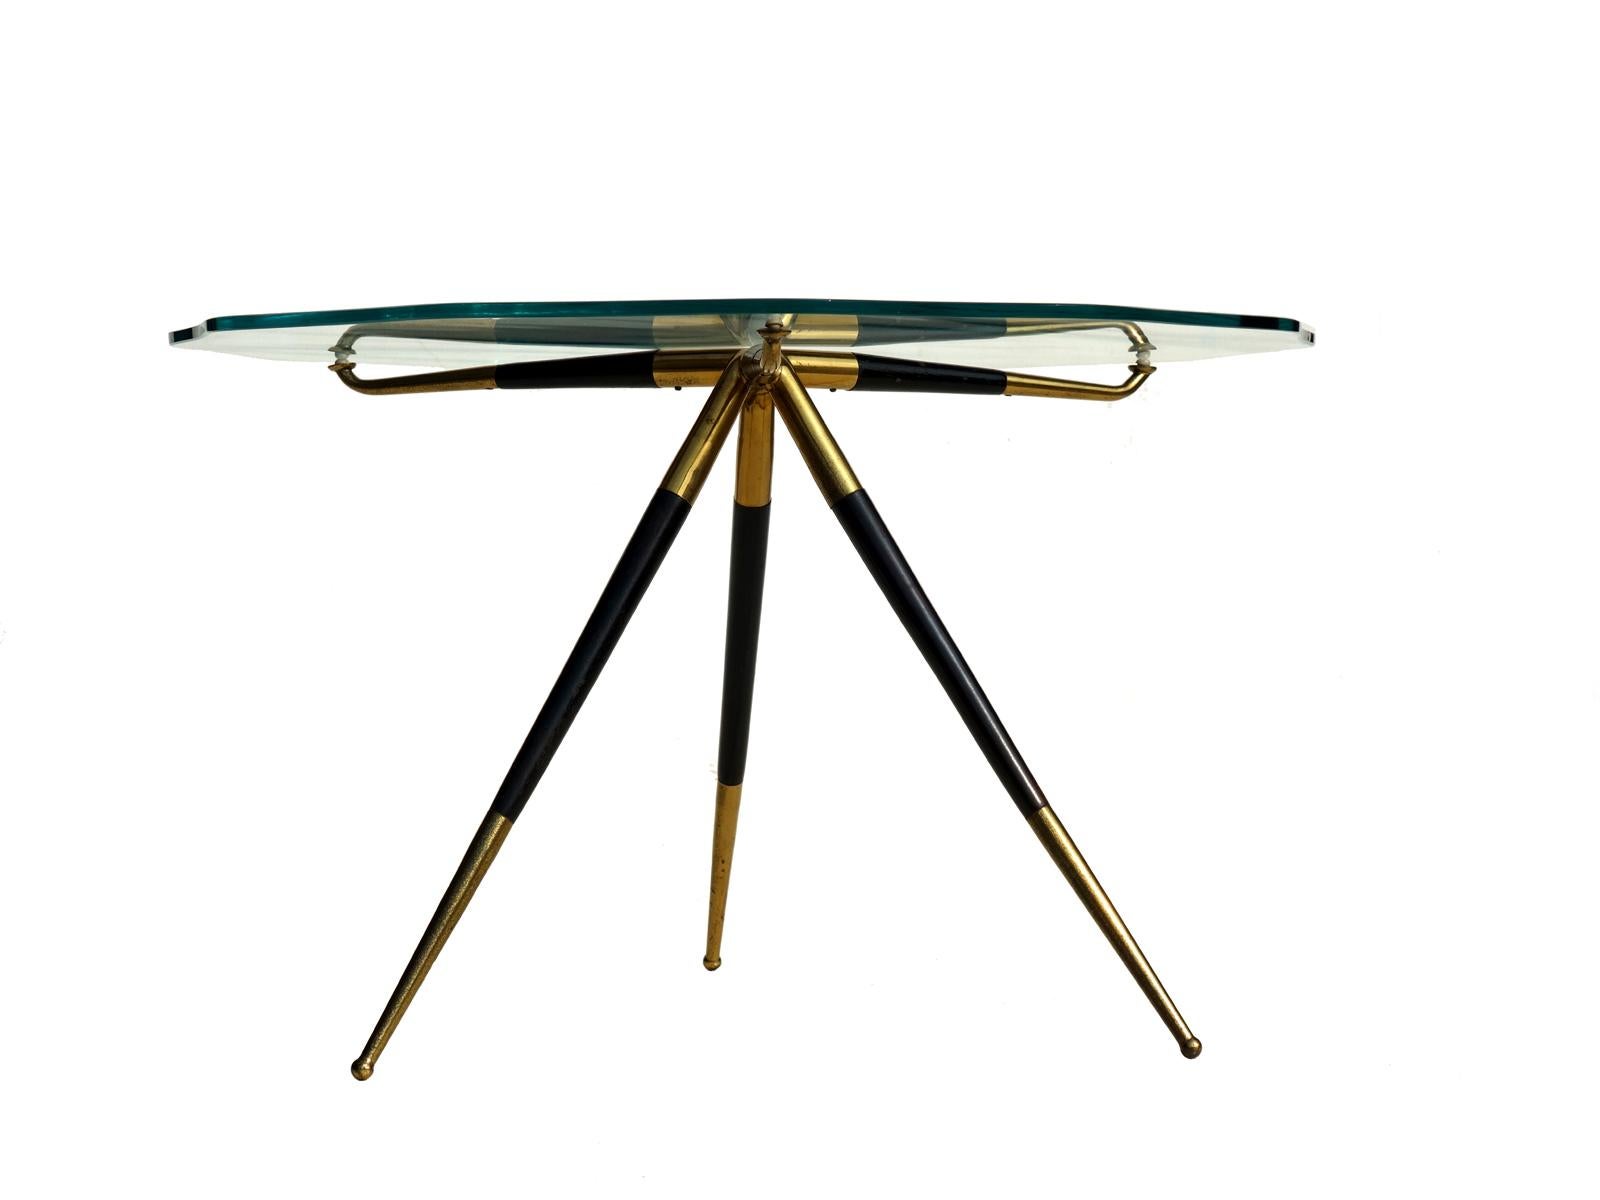 Rare coffee table.
Mahogany and brass base, original 1950s crystal top.
Excellent condition, glass perfect.